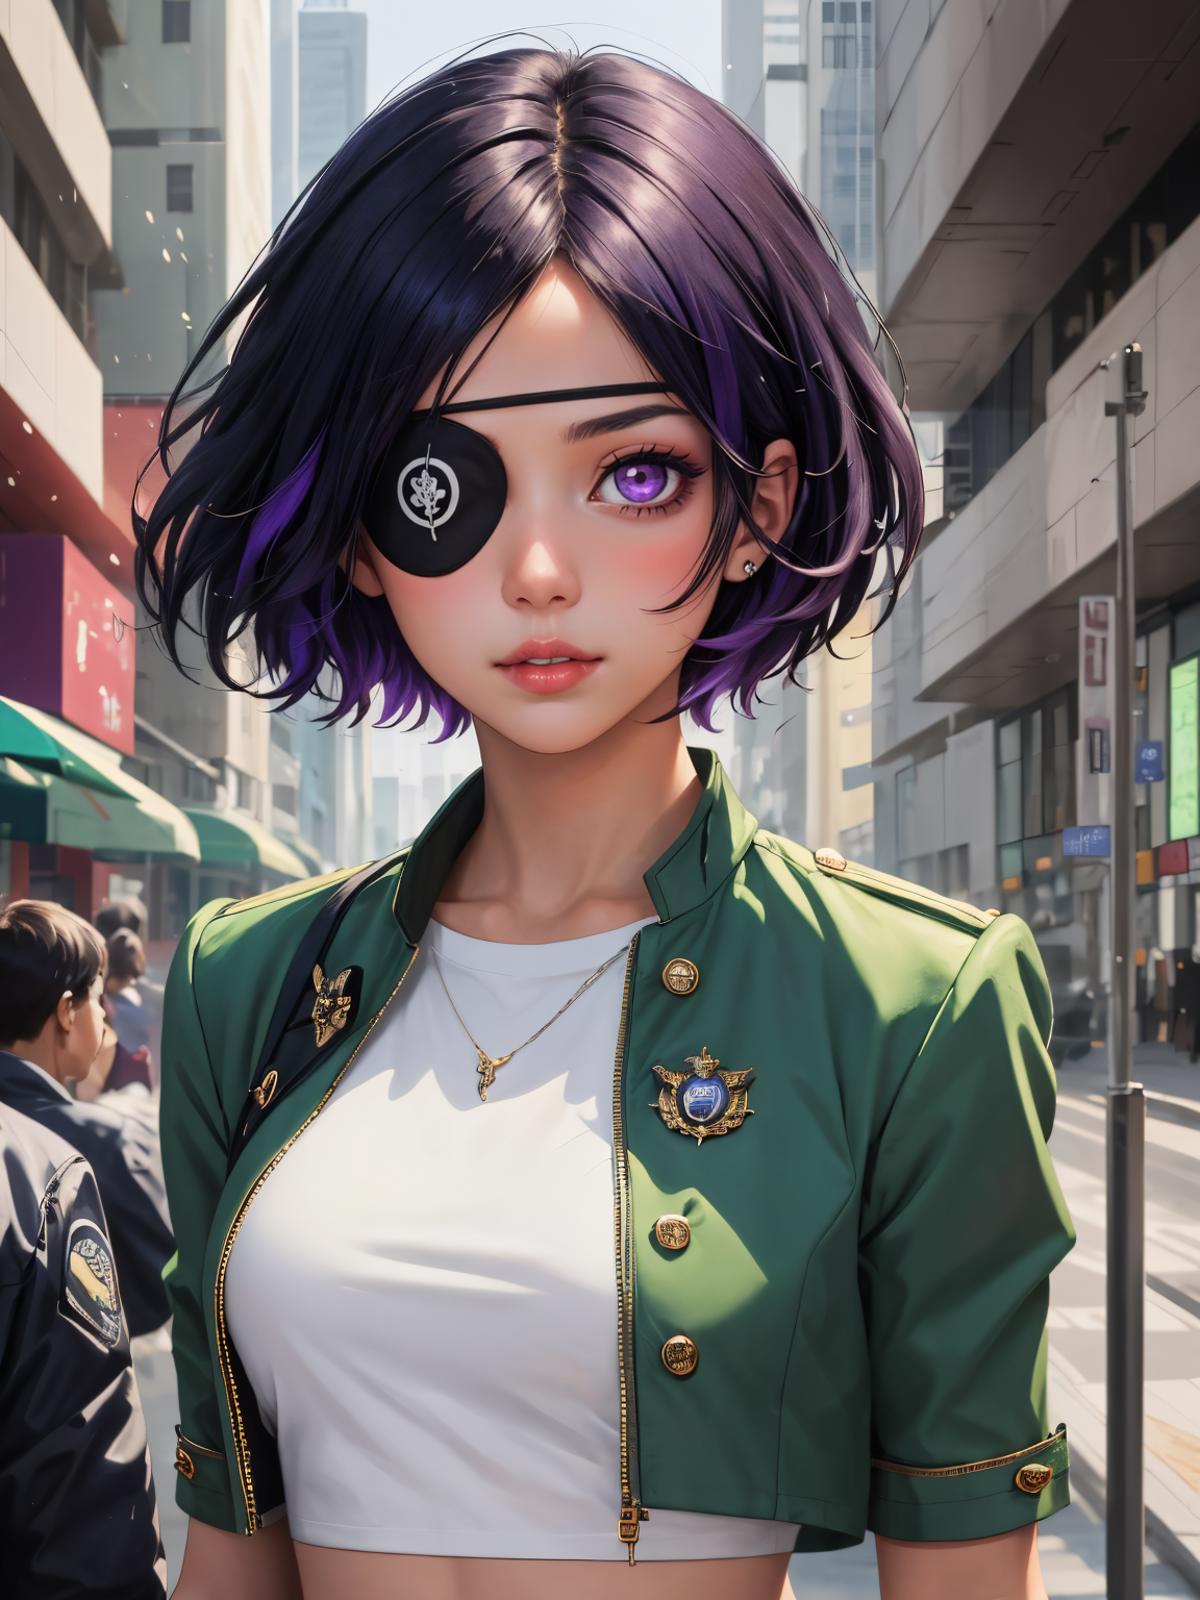 A woman wearing a purple wig, eye patch, and green jacket.